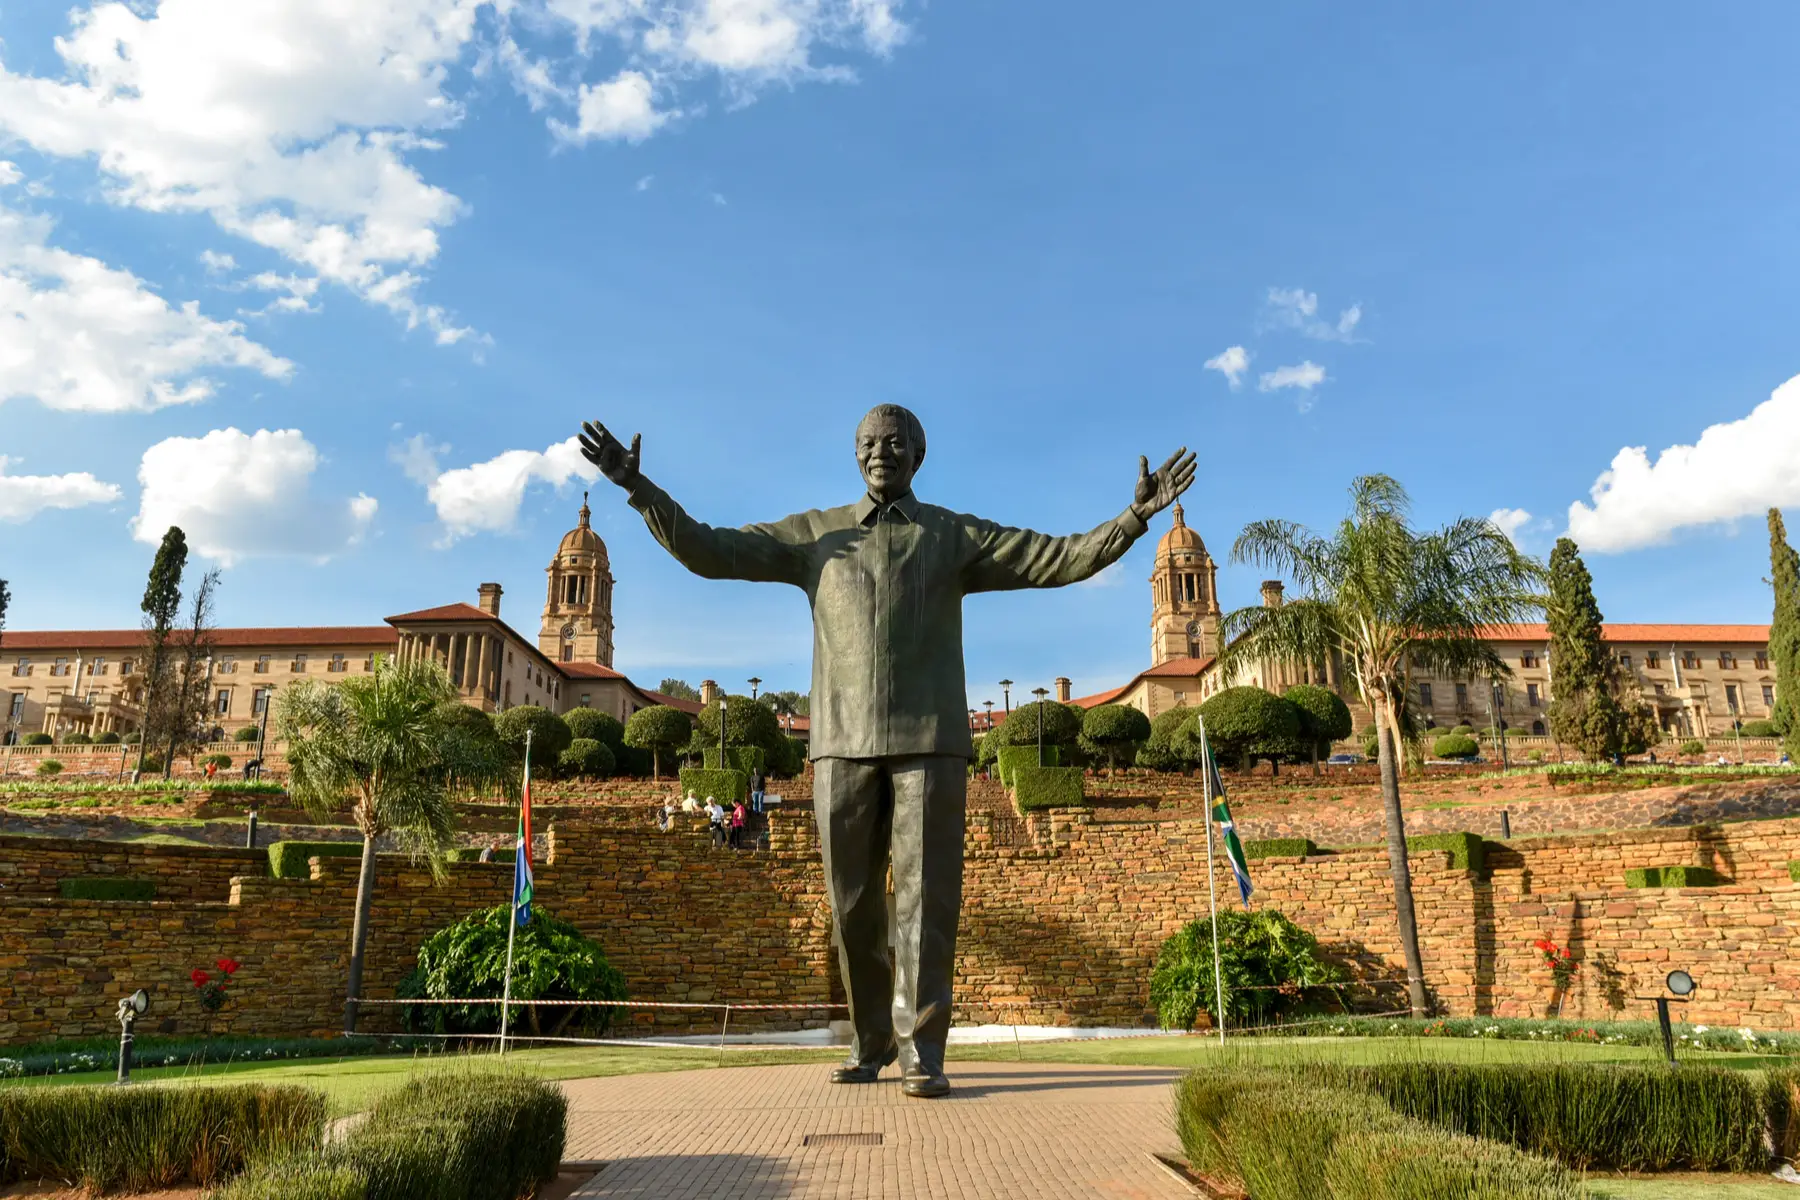 a statute of human rights icon Nelson Mandela in Pretoria, South Africa